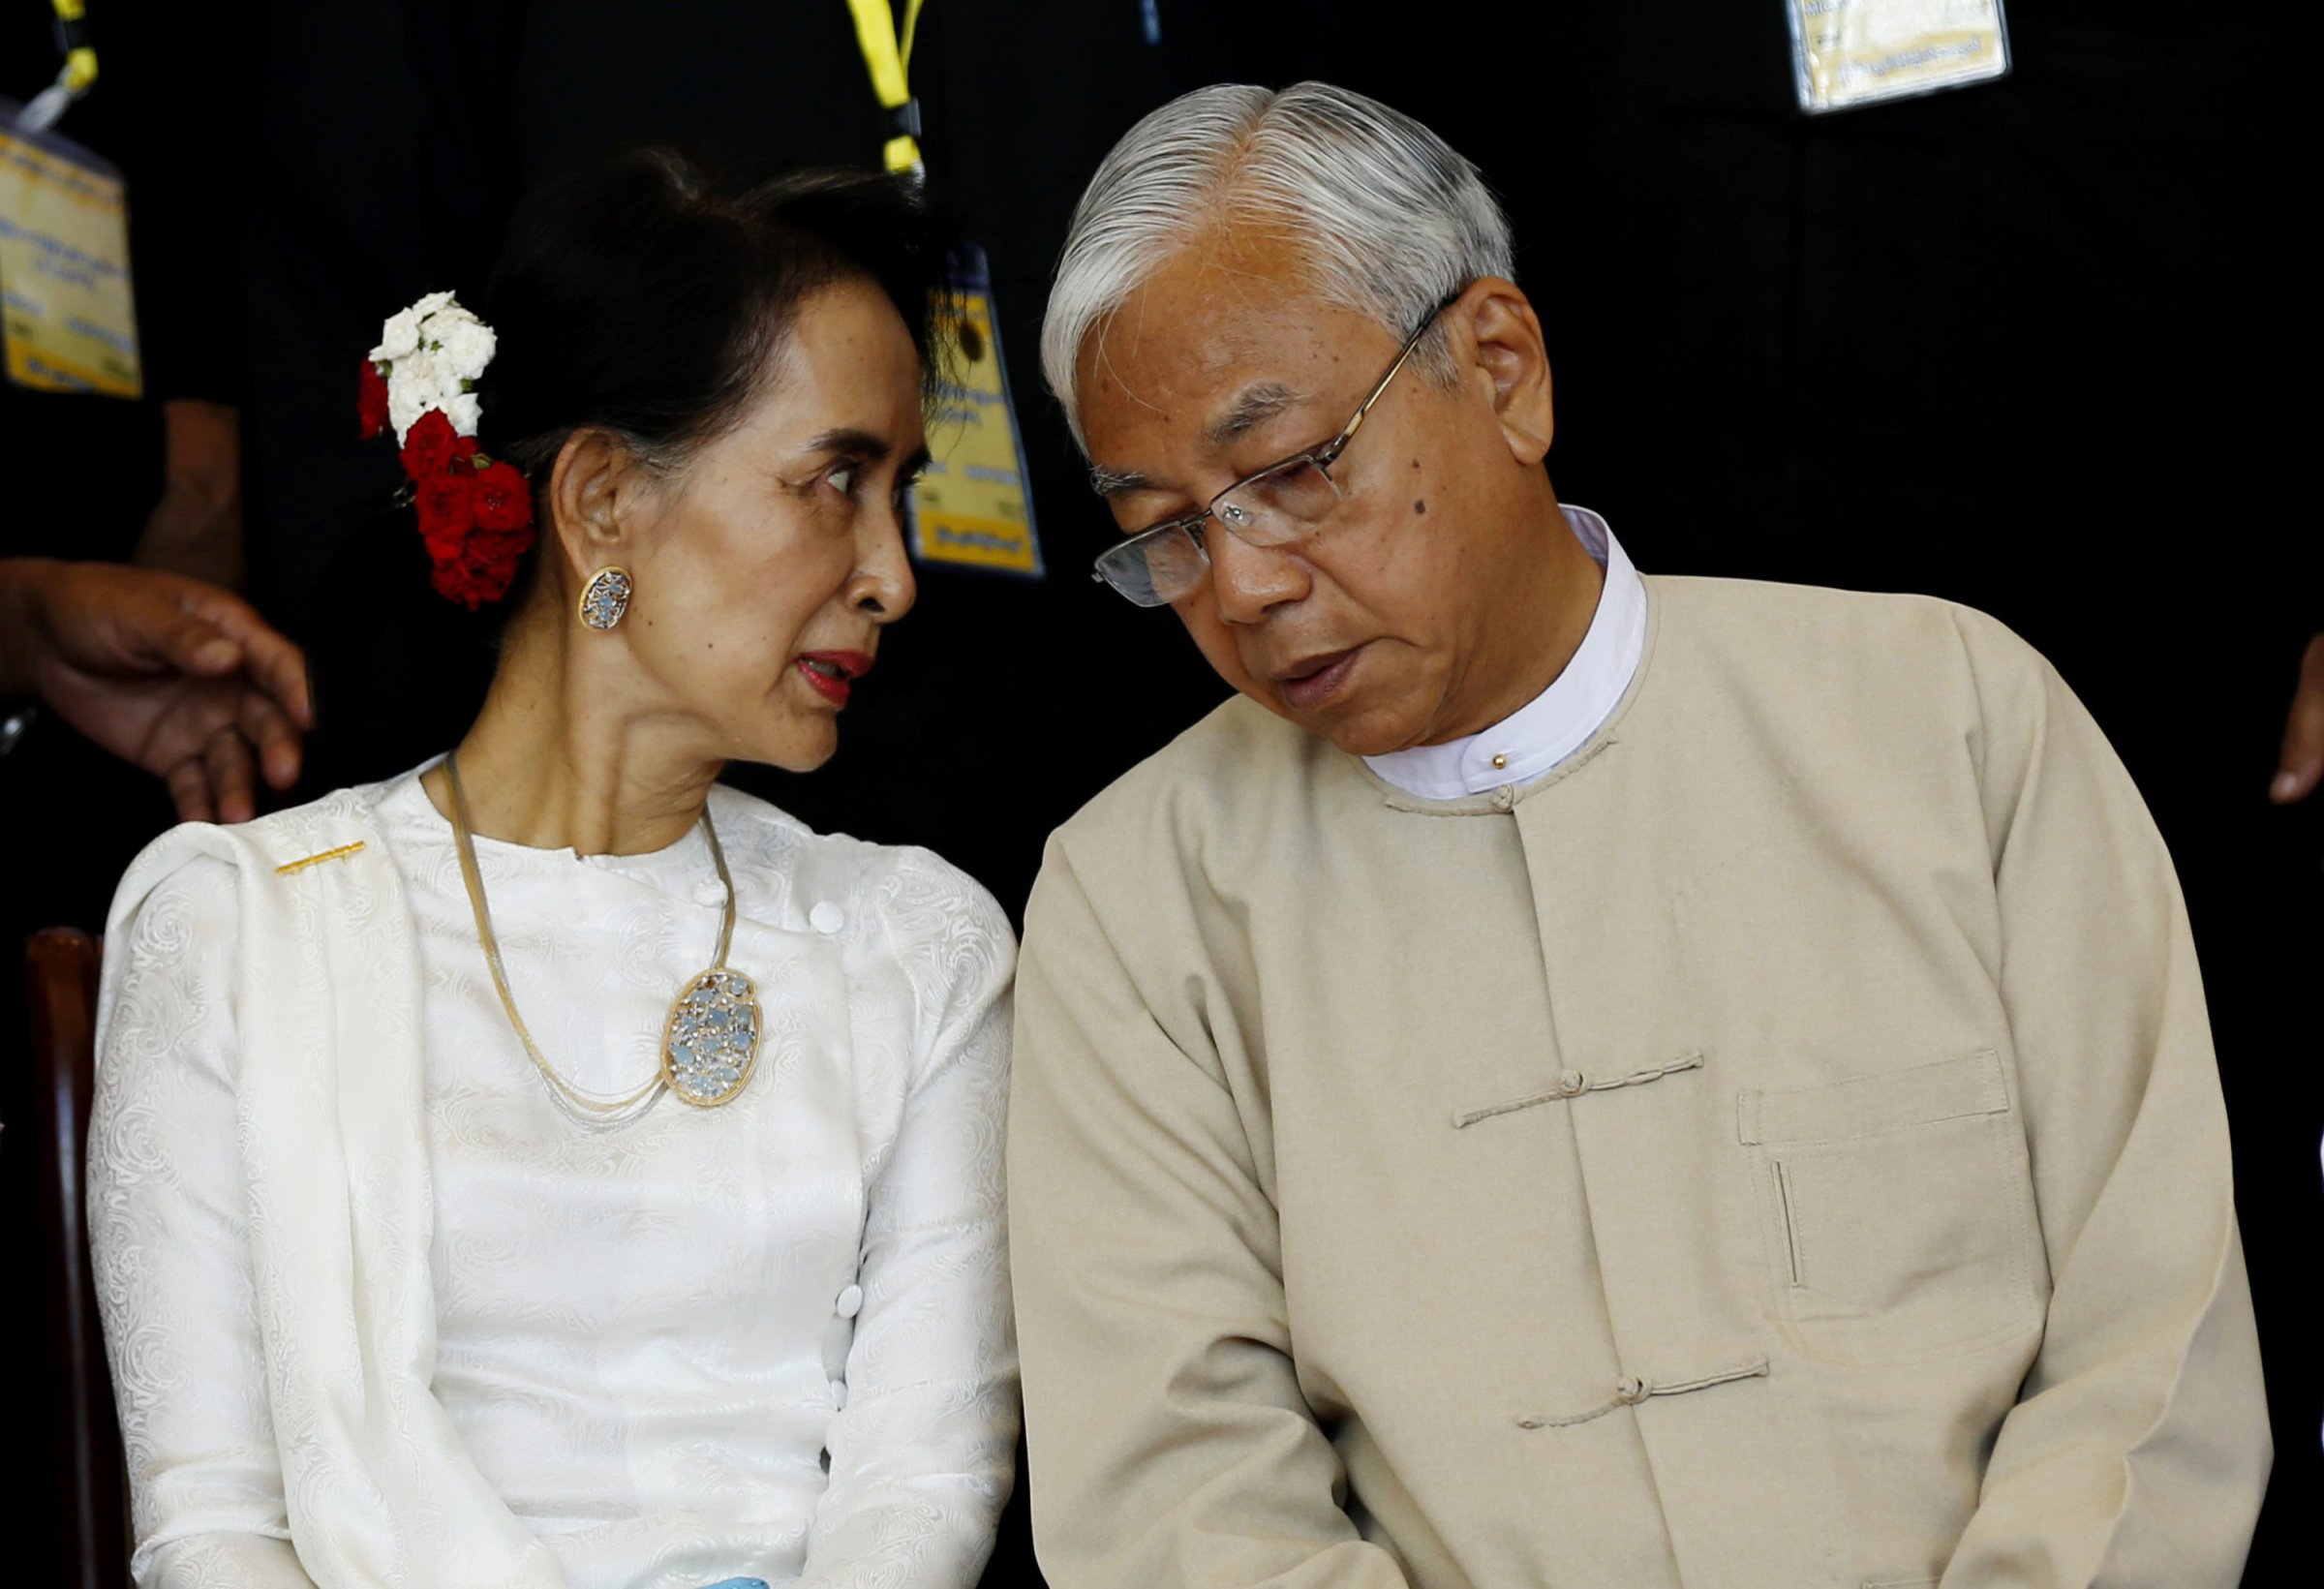 Myanmar President U Htin Kyaw (R) talks with Myanmar State Counselor Aung San Suu Kyi during the 21st Century Panglong Peace Conference at the Myanmar International Convention Centre in Nay Pyi Taw, Myanmar, Aug. 31, 2016.